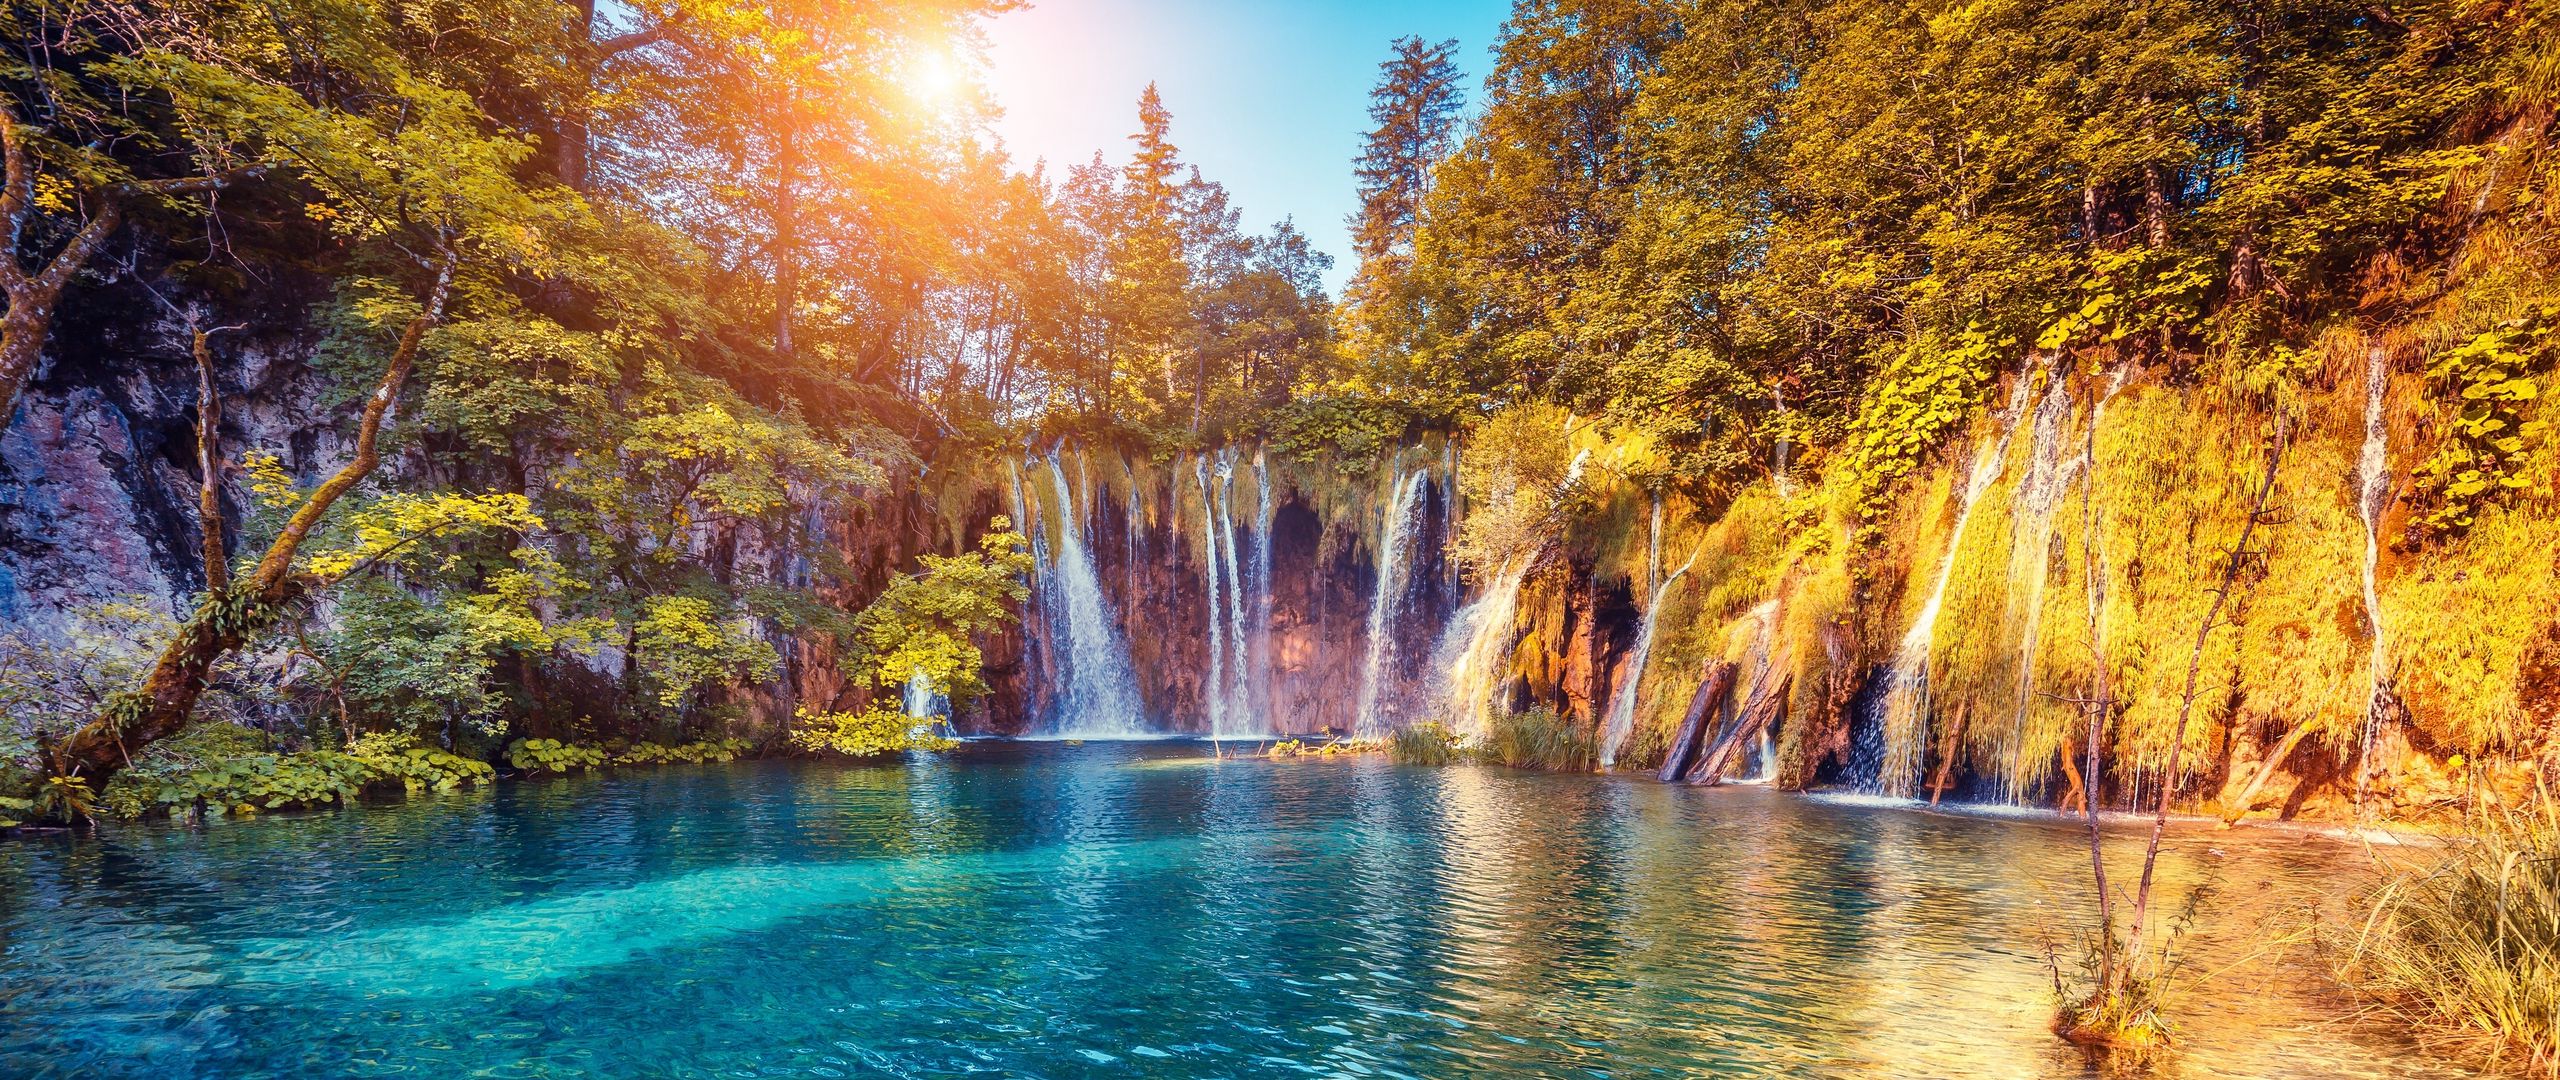 Download wallpaper 2560x1080 waterfall, precipice, sunlight, summer,  bright, trees dual wide 1080p hd background